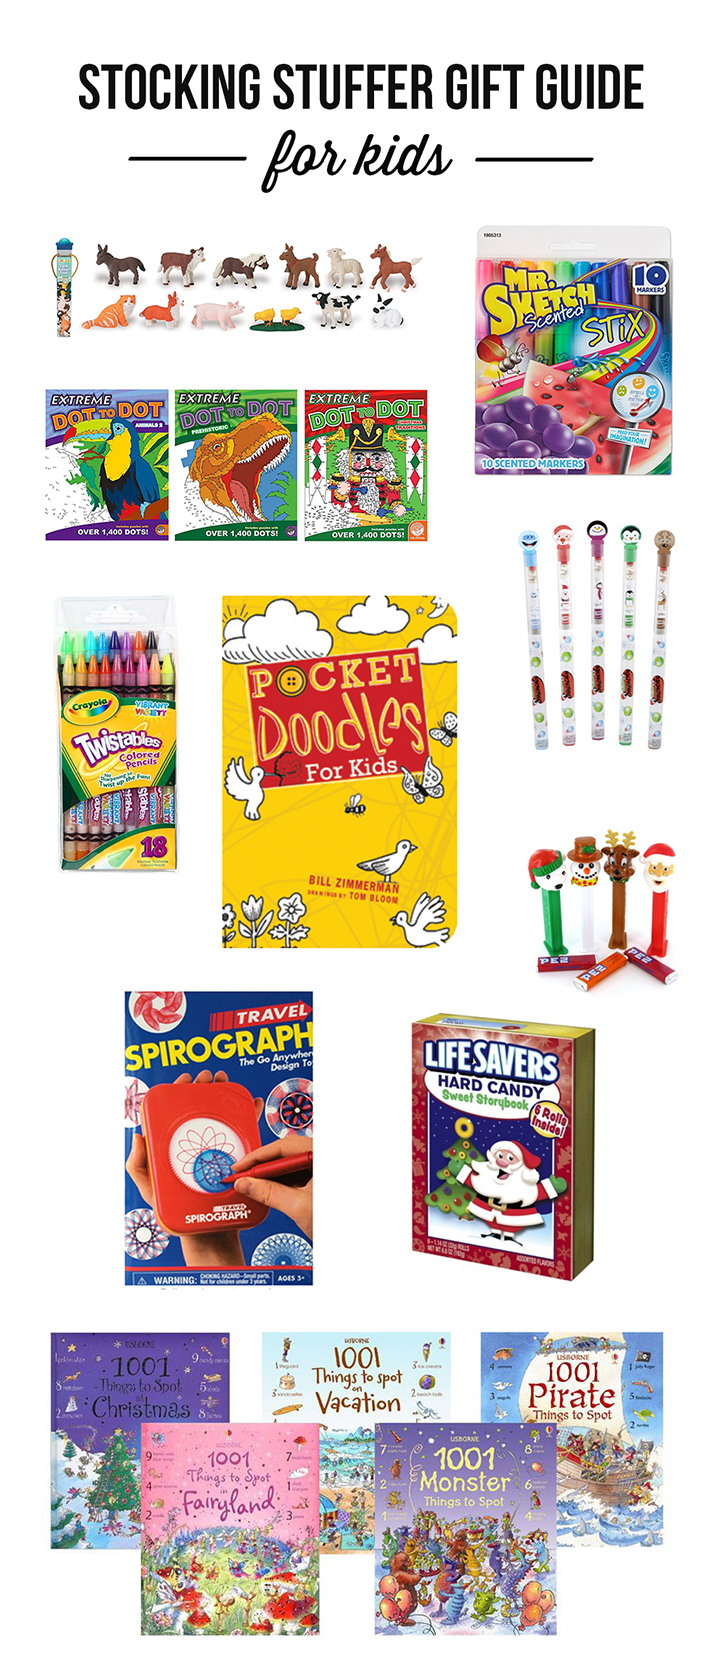 The ultimate stocking stuffer gift guide for kids. Lot's of unique and memorable gift ideas!